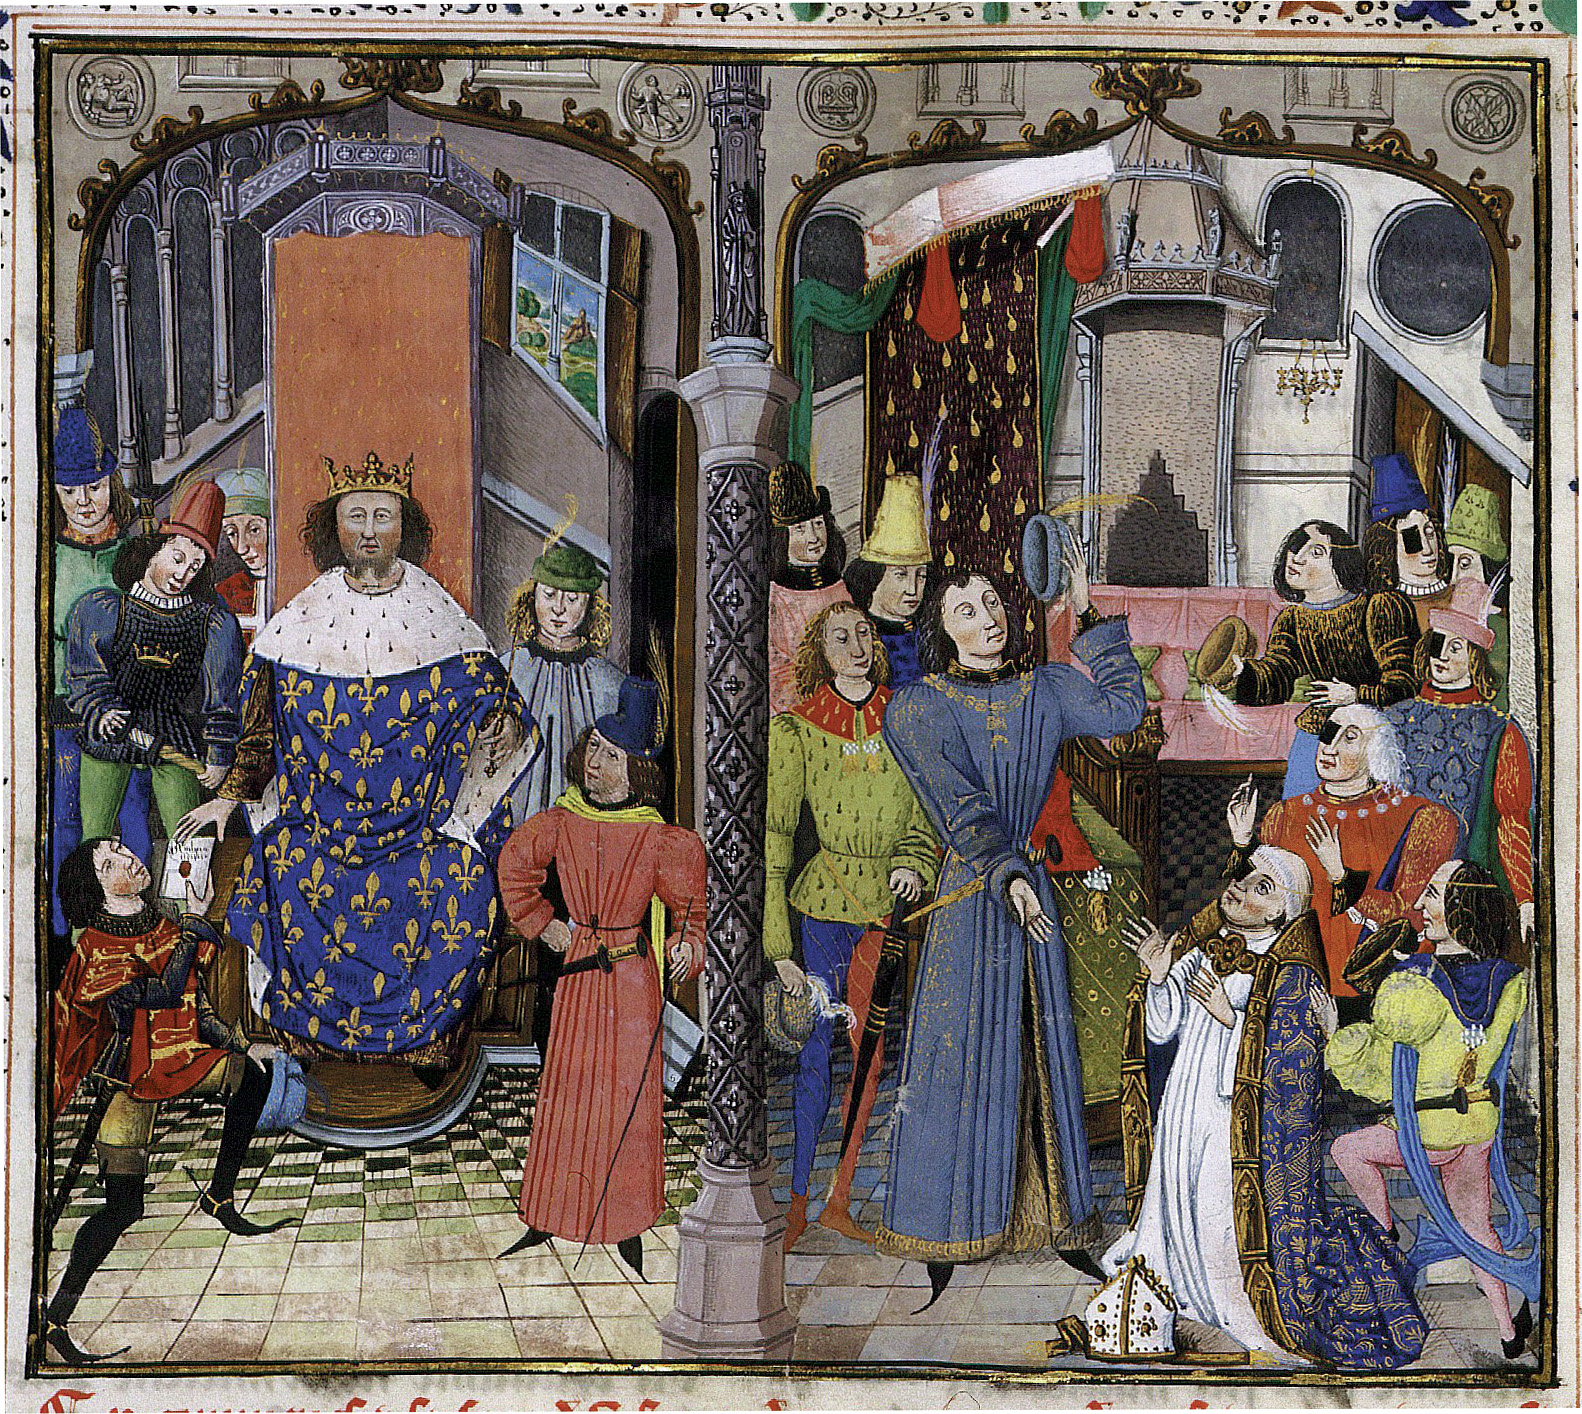 King Philip of France sits at the left, while Edward III of England is presented a challenge on the right.